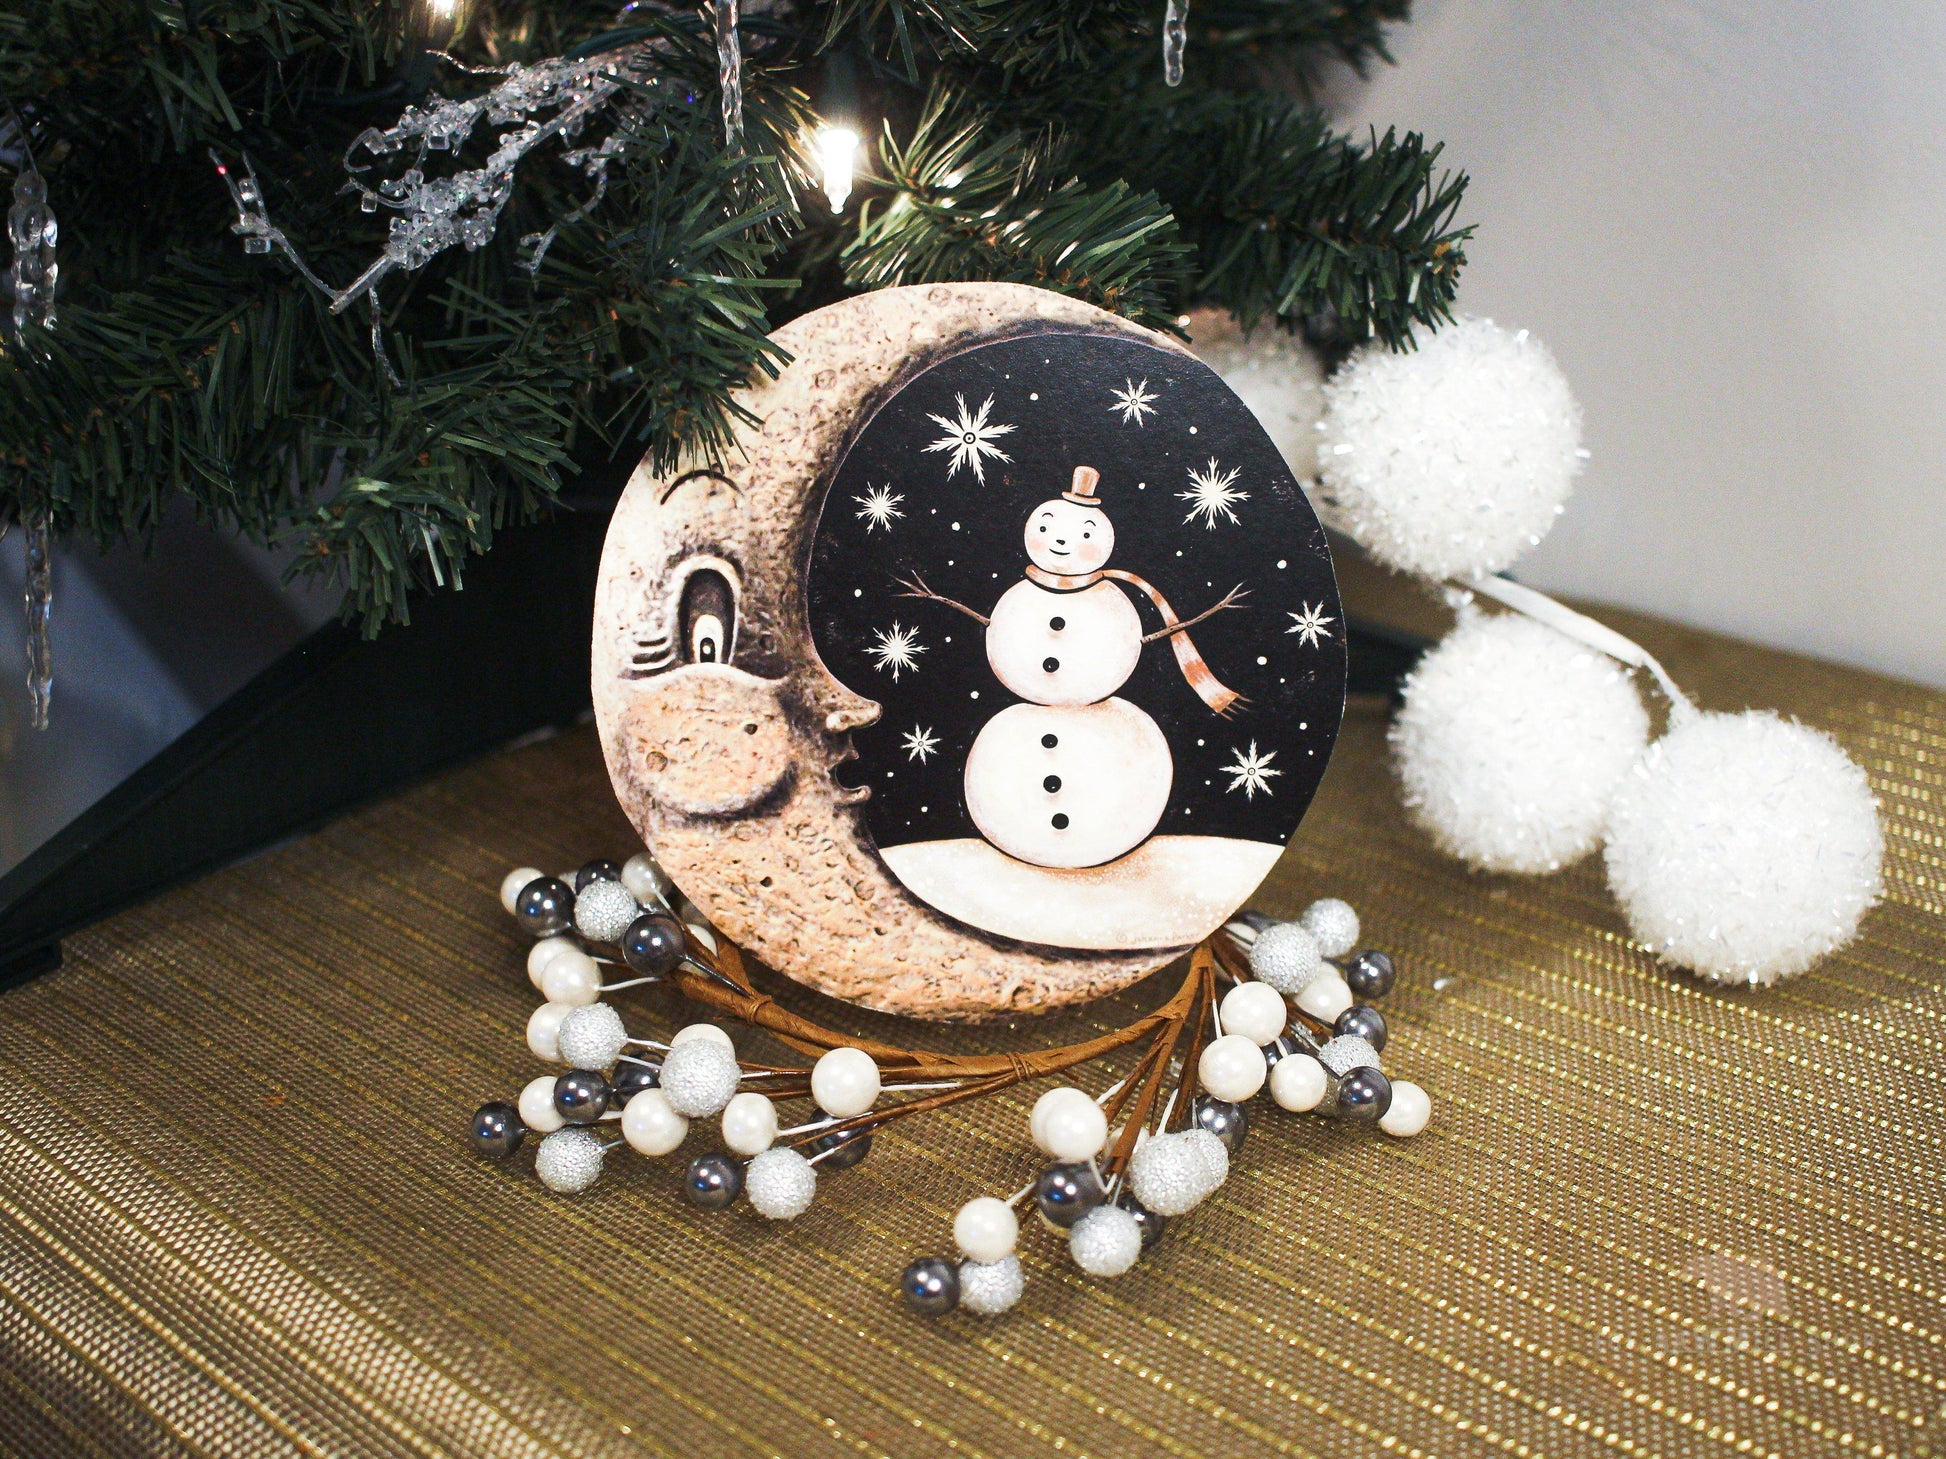 Vintage Christmas Moon with Snowman Background Wood Cutout-The Sawmill Shop